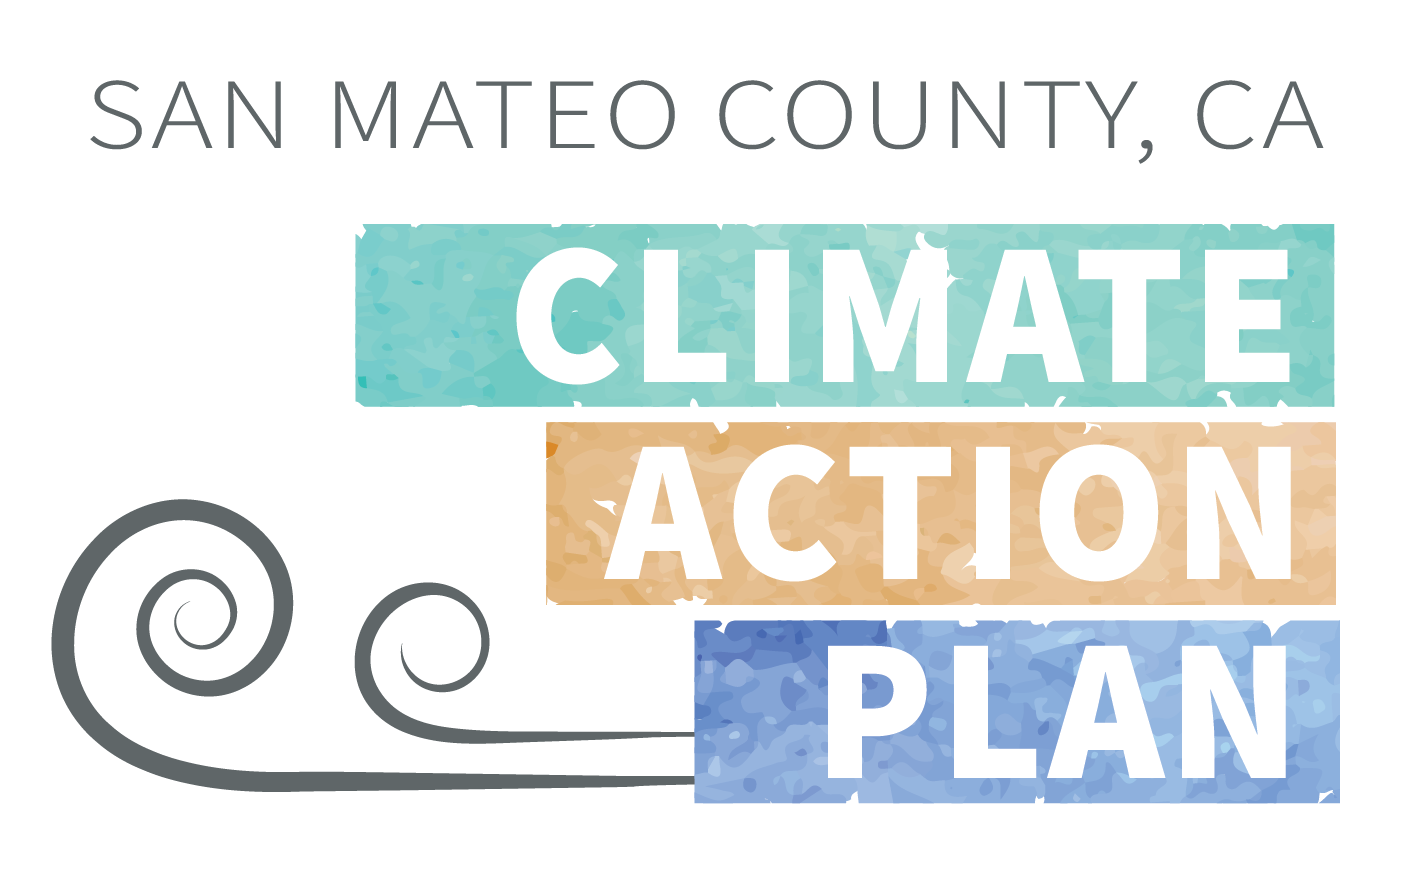 San Mateo County Climate Action Plan